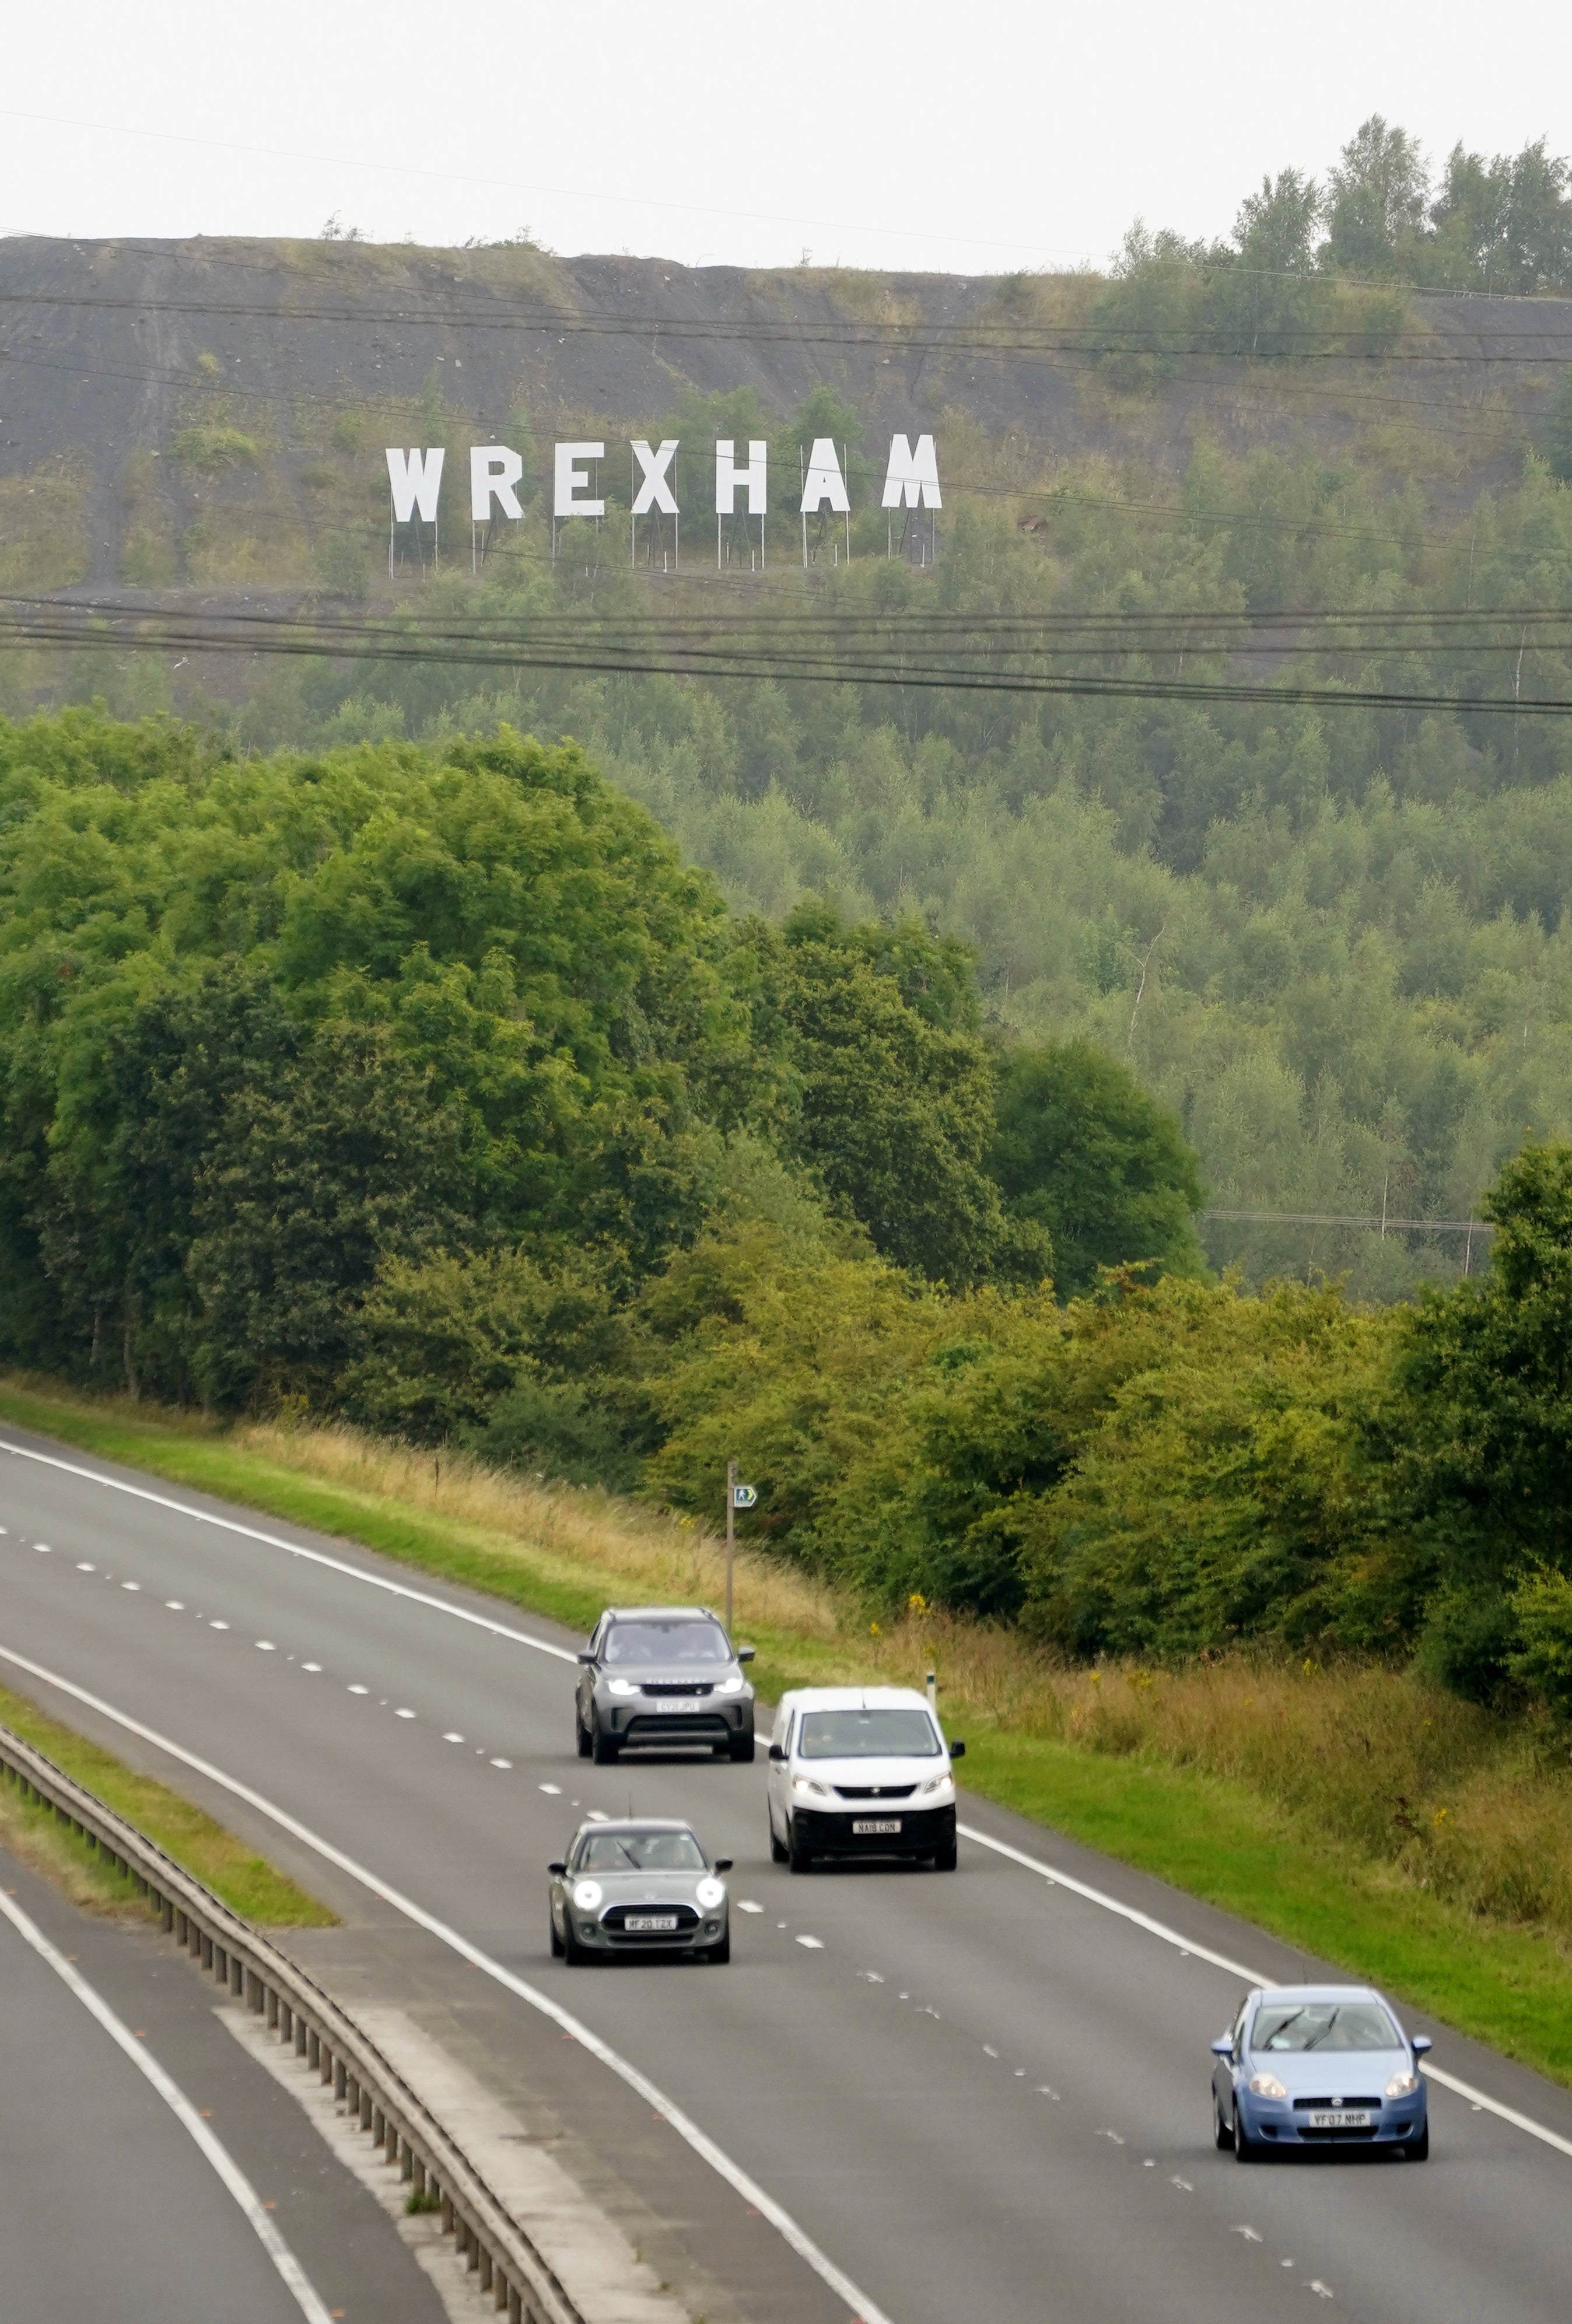 A large sign for Wrexham, in the style of the Hollywood sign in Los Angeles, installed on the Bursham Bank (Peter Byrne/PA)